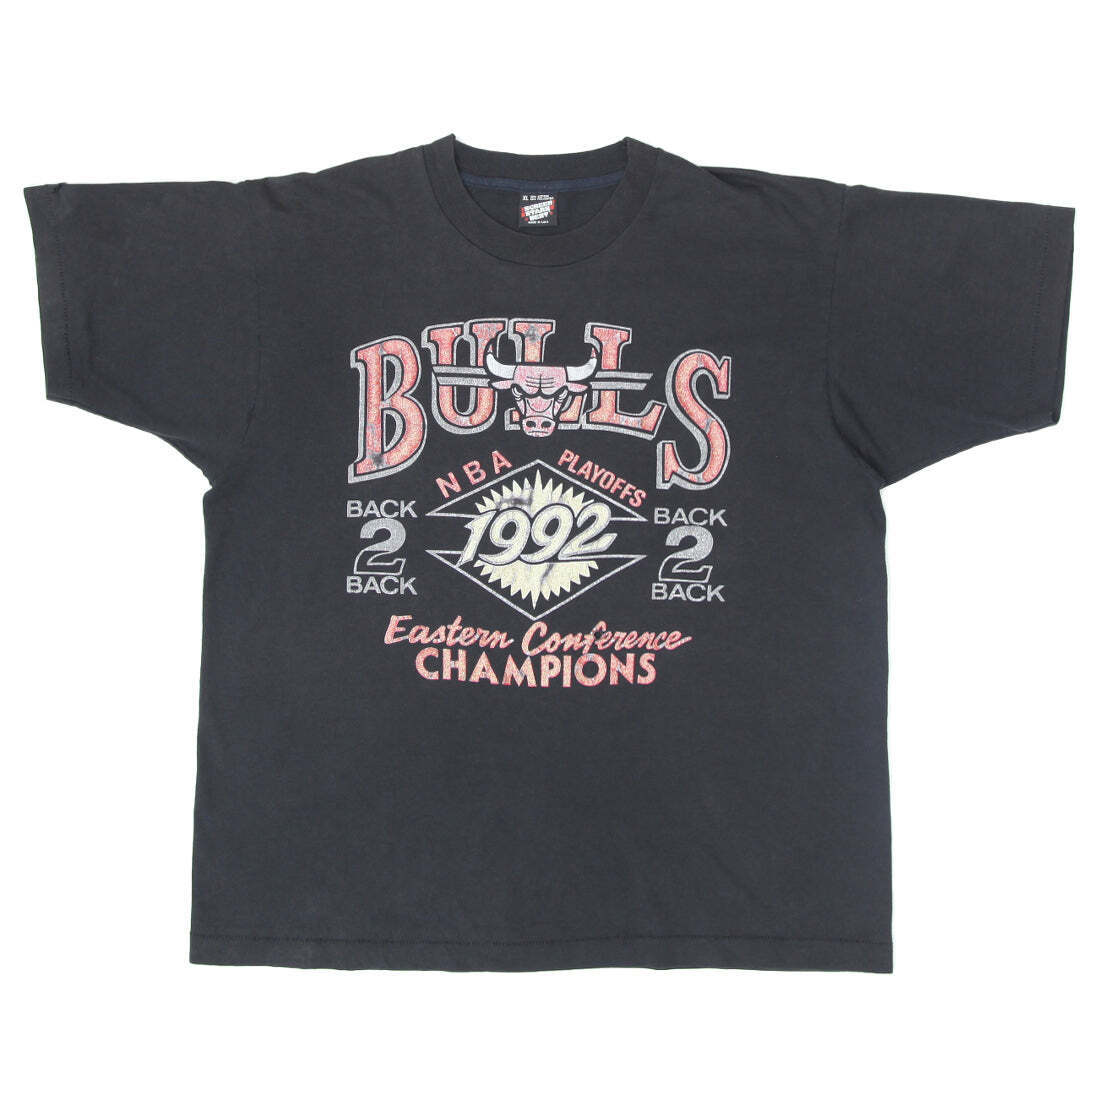 1992 Vintage Chicago Bulls NBA Play Offs Champions T-Shirt Single Stitch Made in